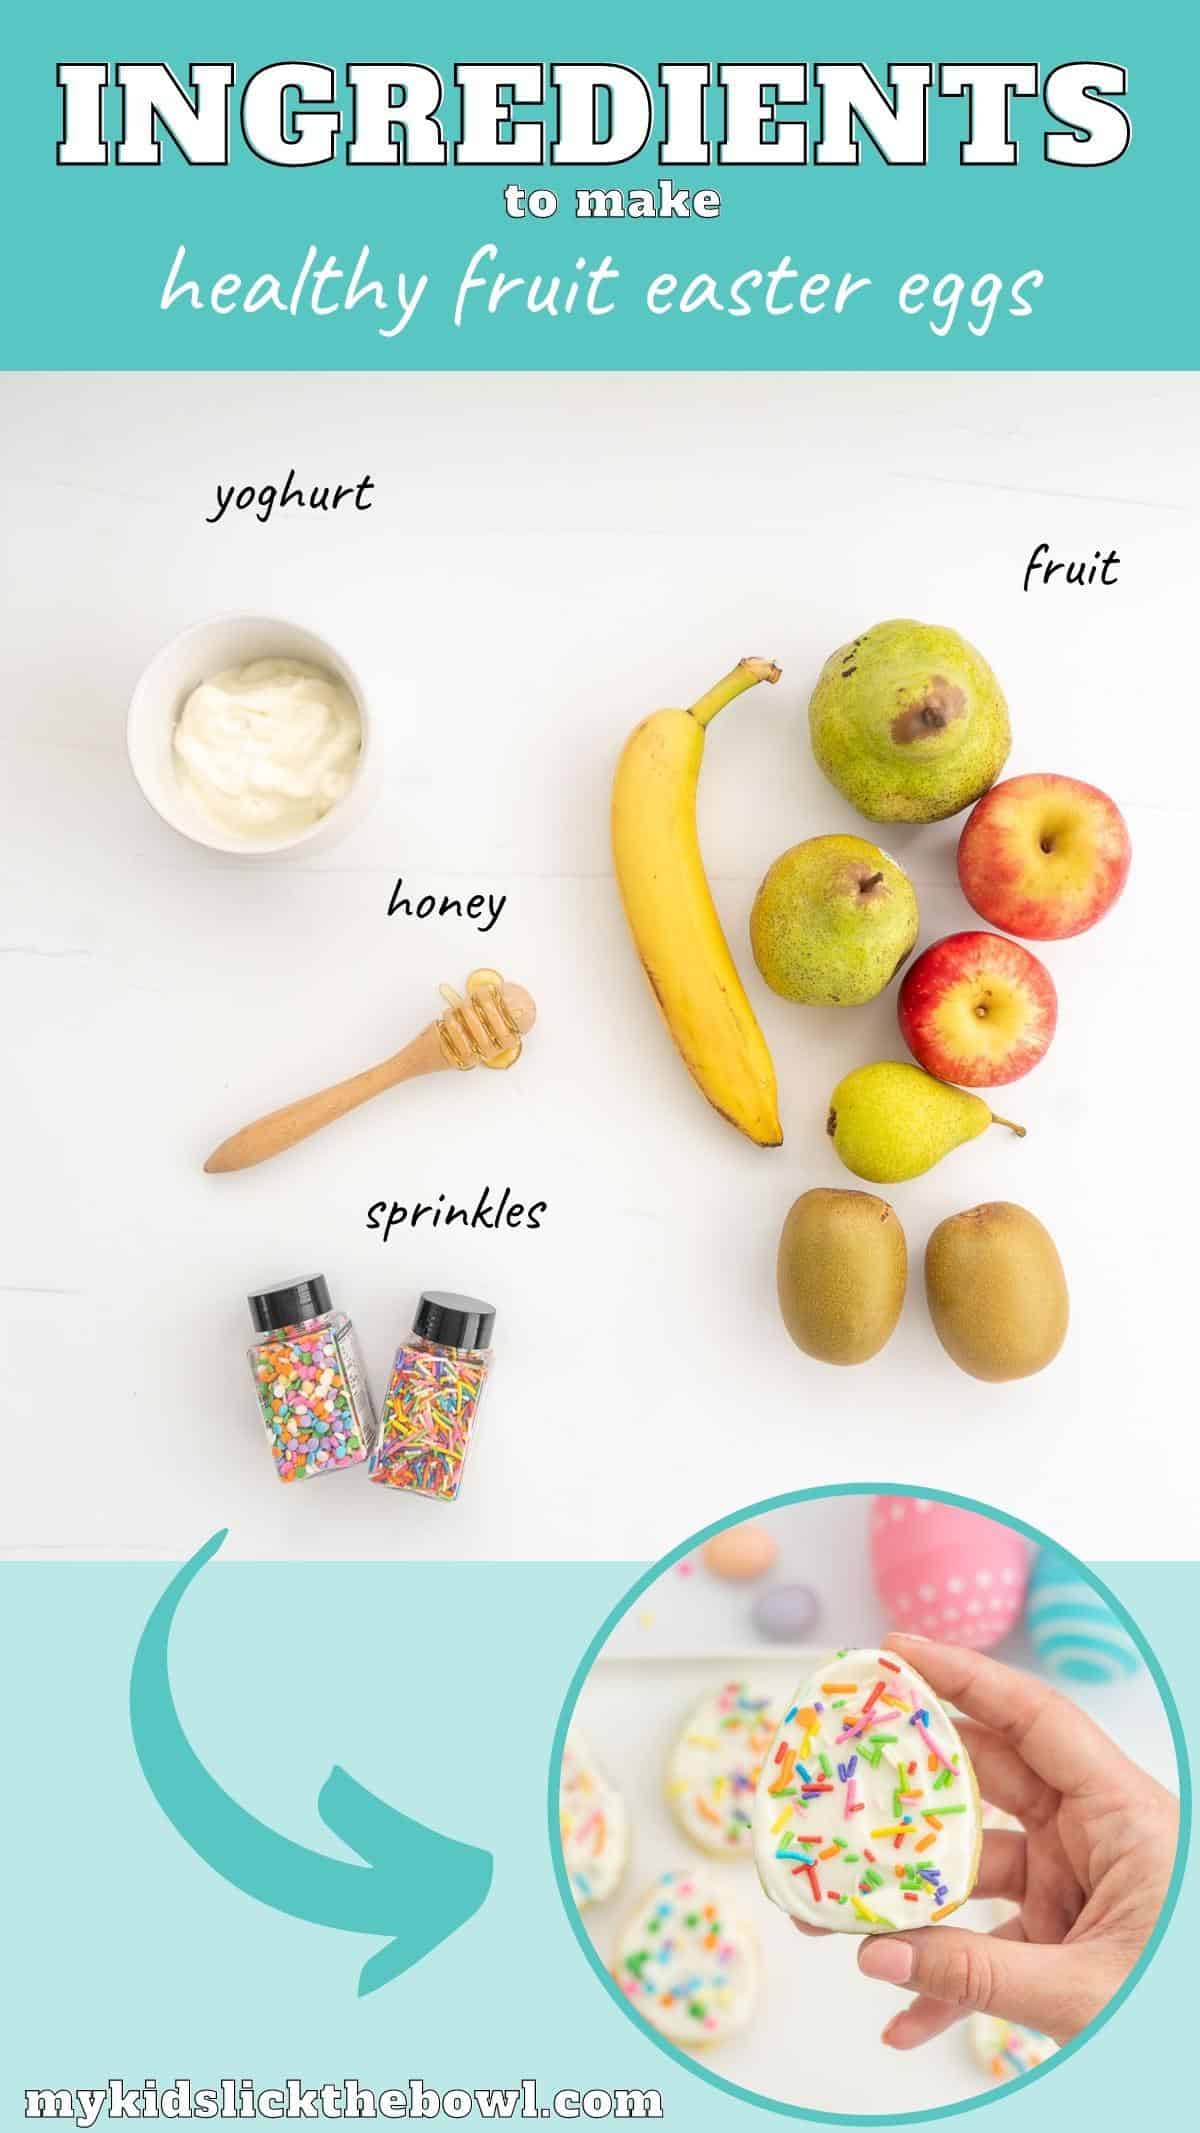 The ingredients to make healthy easter eggs from fruit slices laid out on a bench top with text overlay.